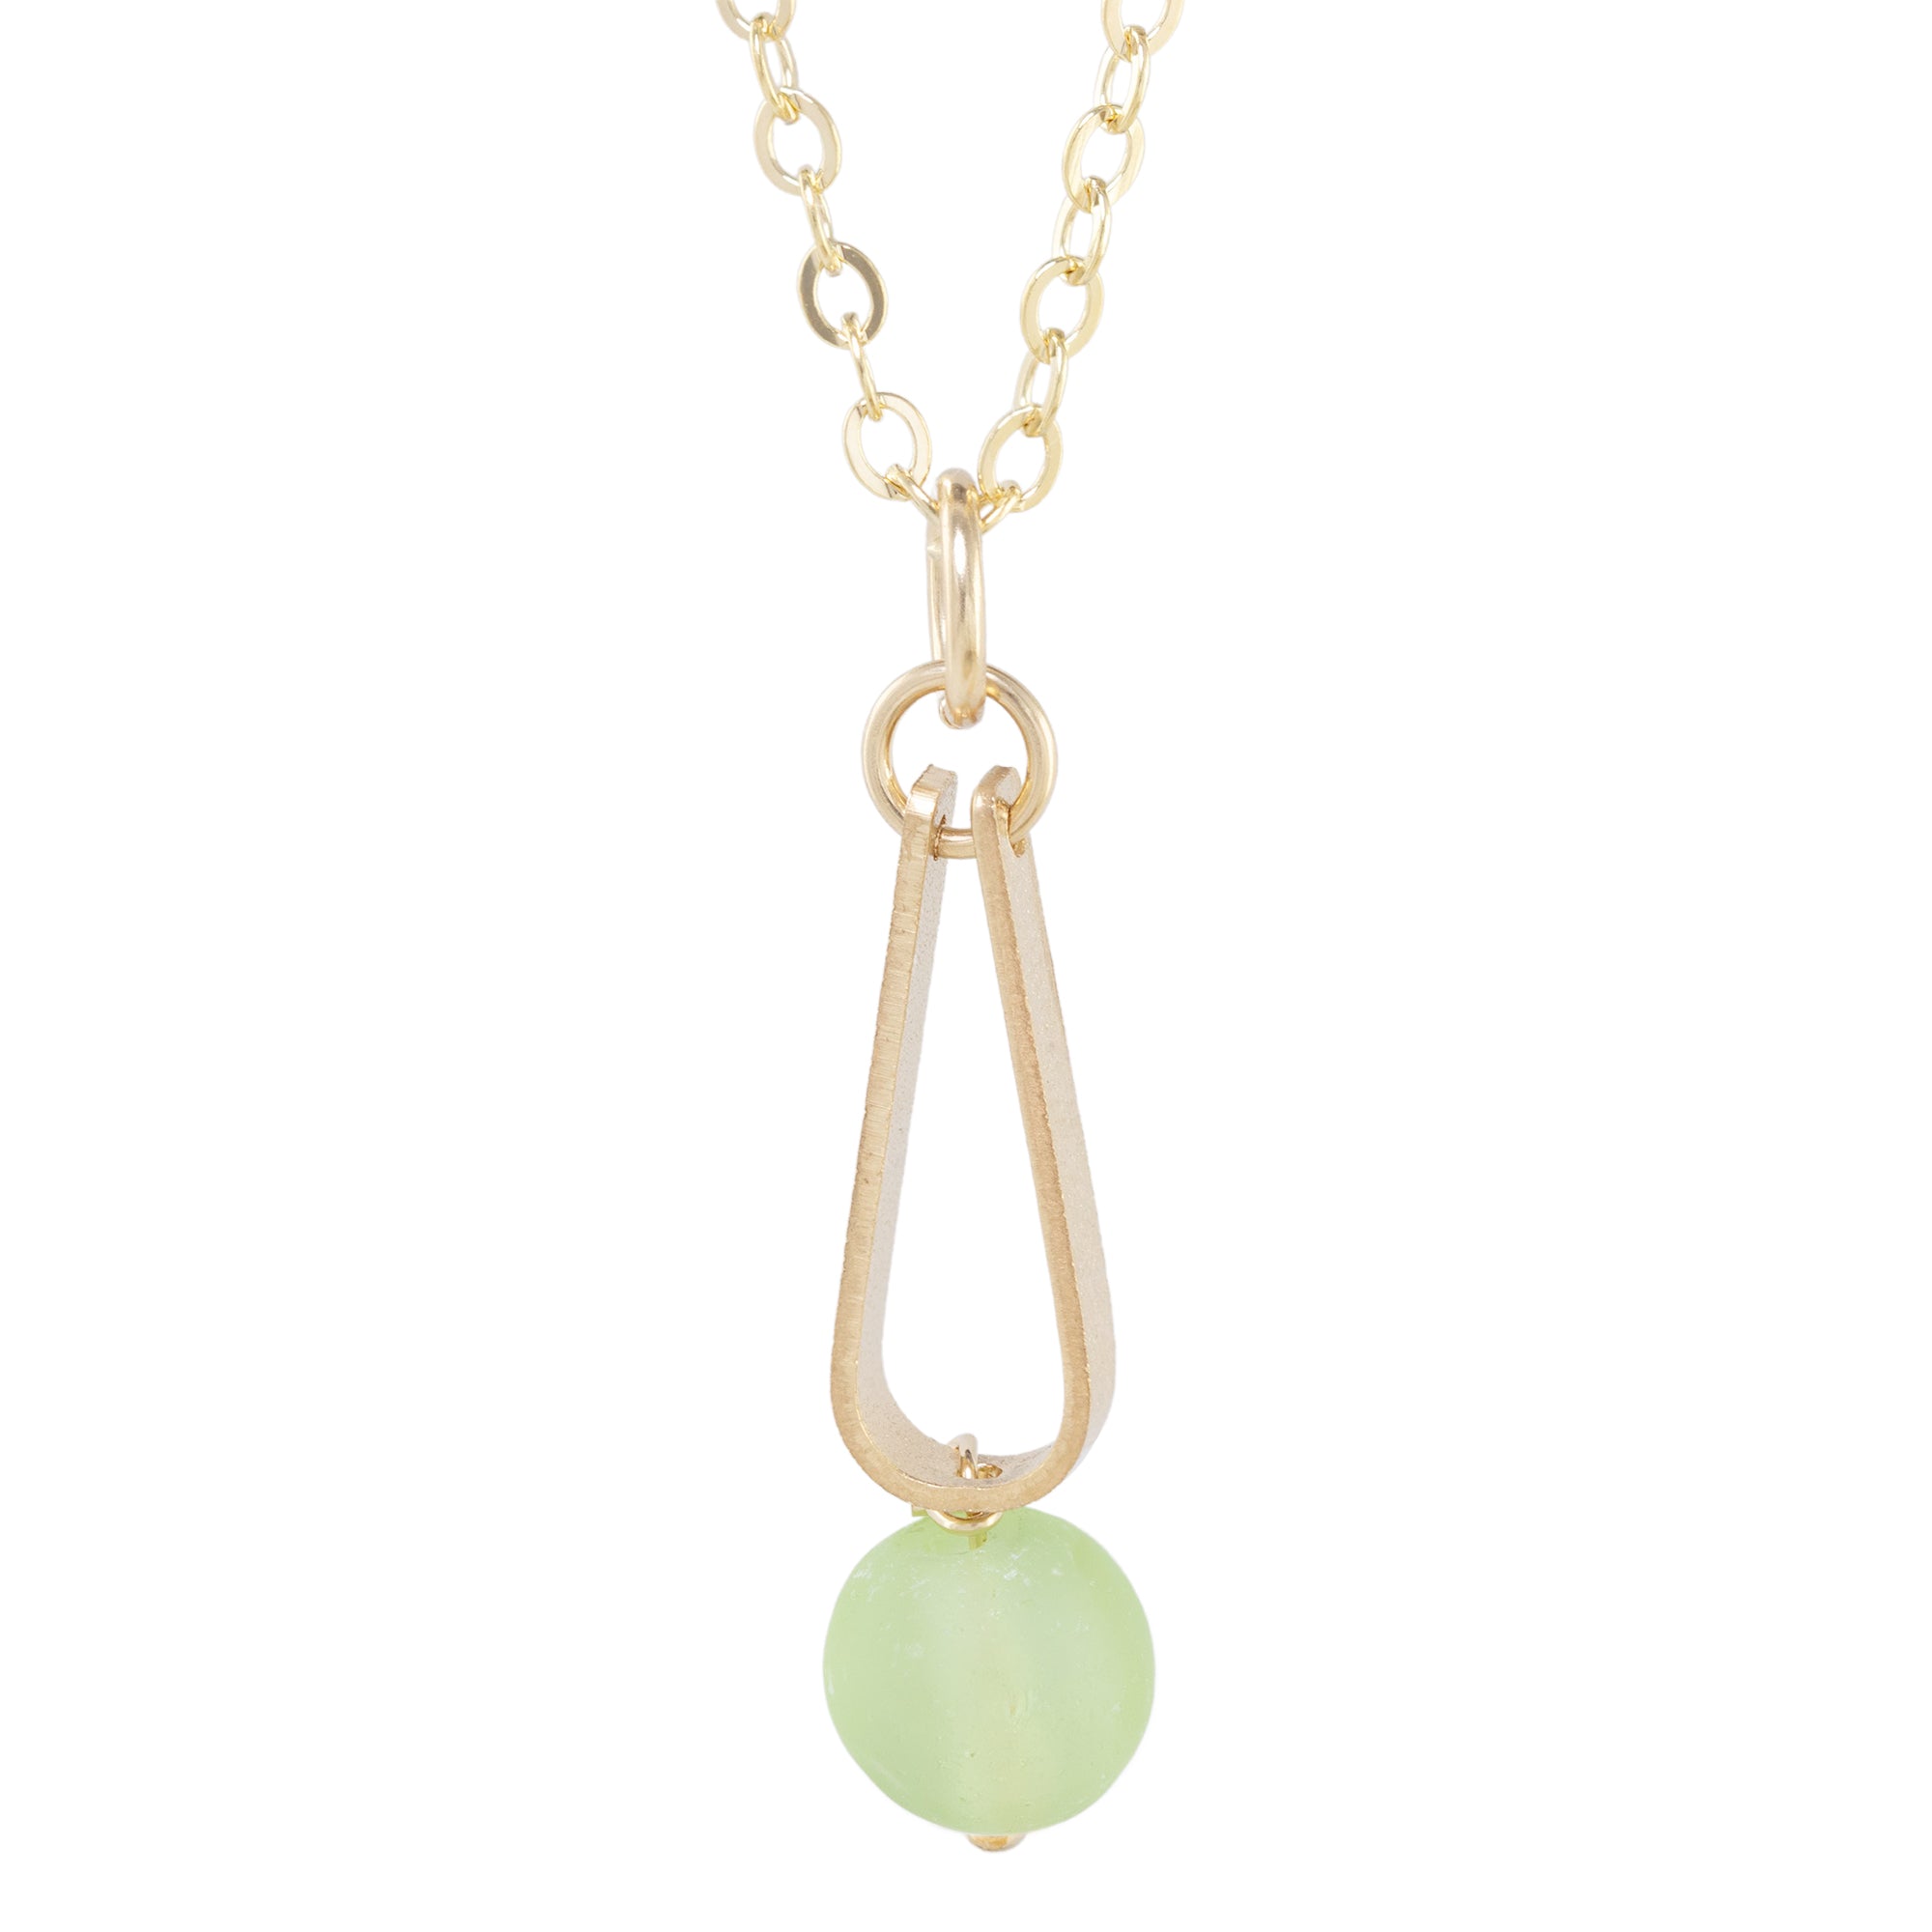 Light Pastel Sage Green Round Recycled Glass Ball and 14K Gold Fill Teardrop Shaped Pendant Necklace